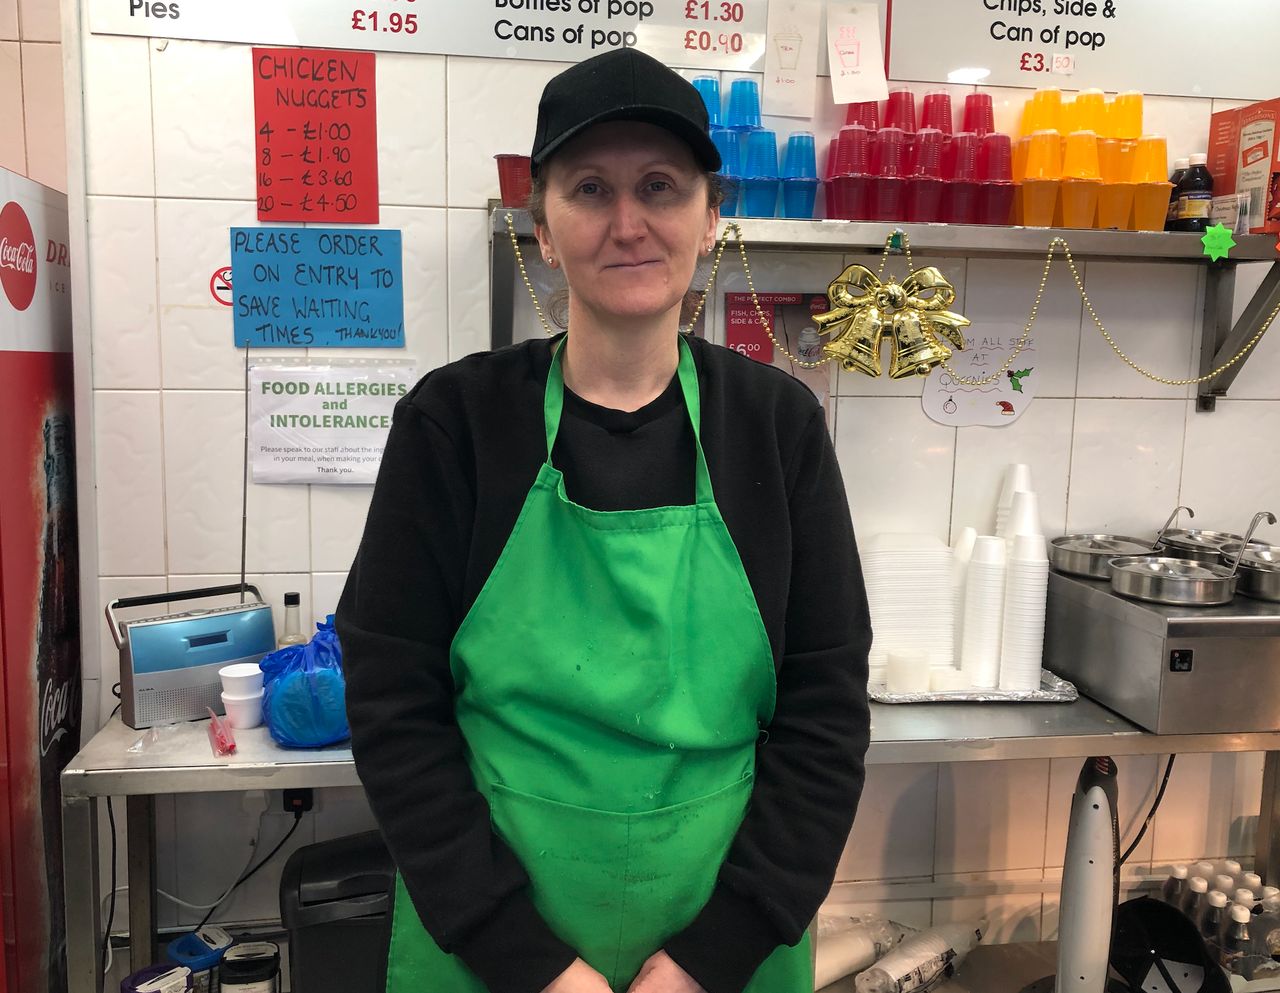 Susan Allen who works at Queenies Chippy and the local shop in Shiregreen, Sheffield